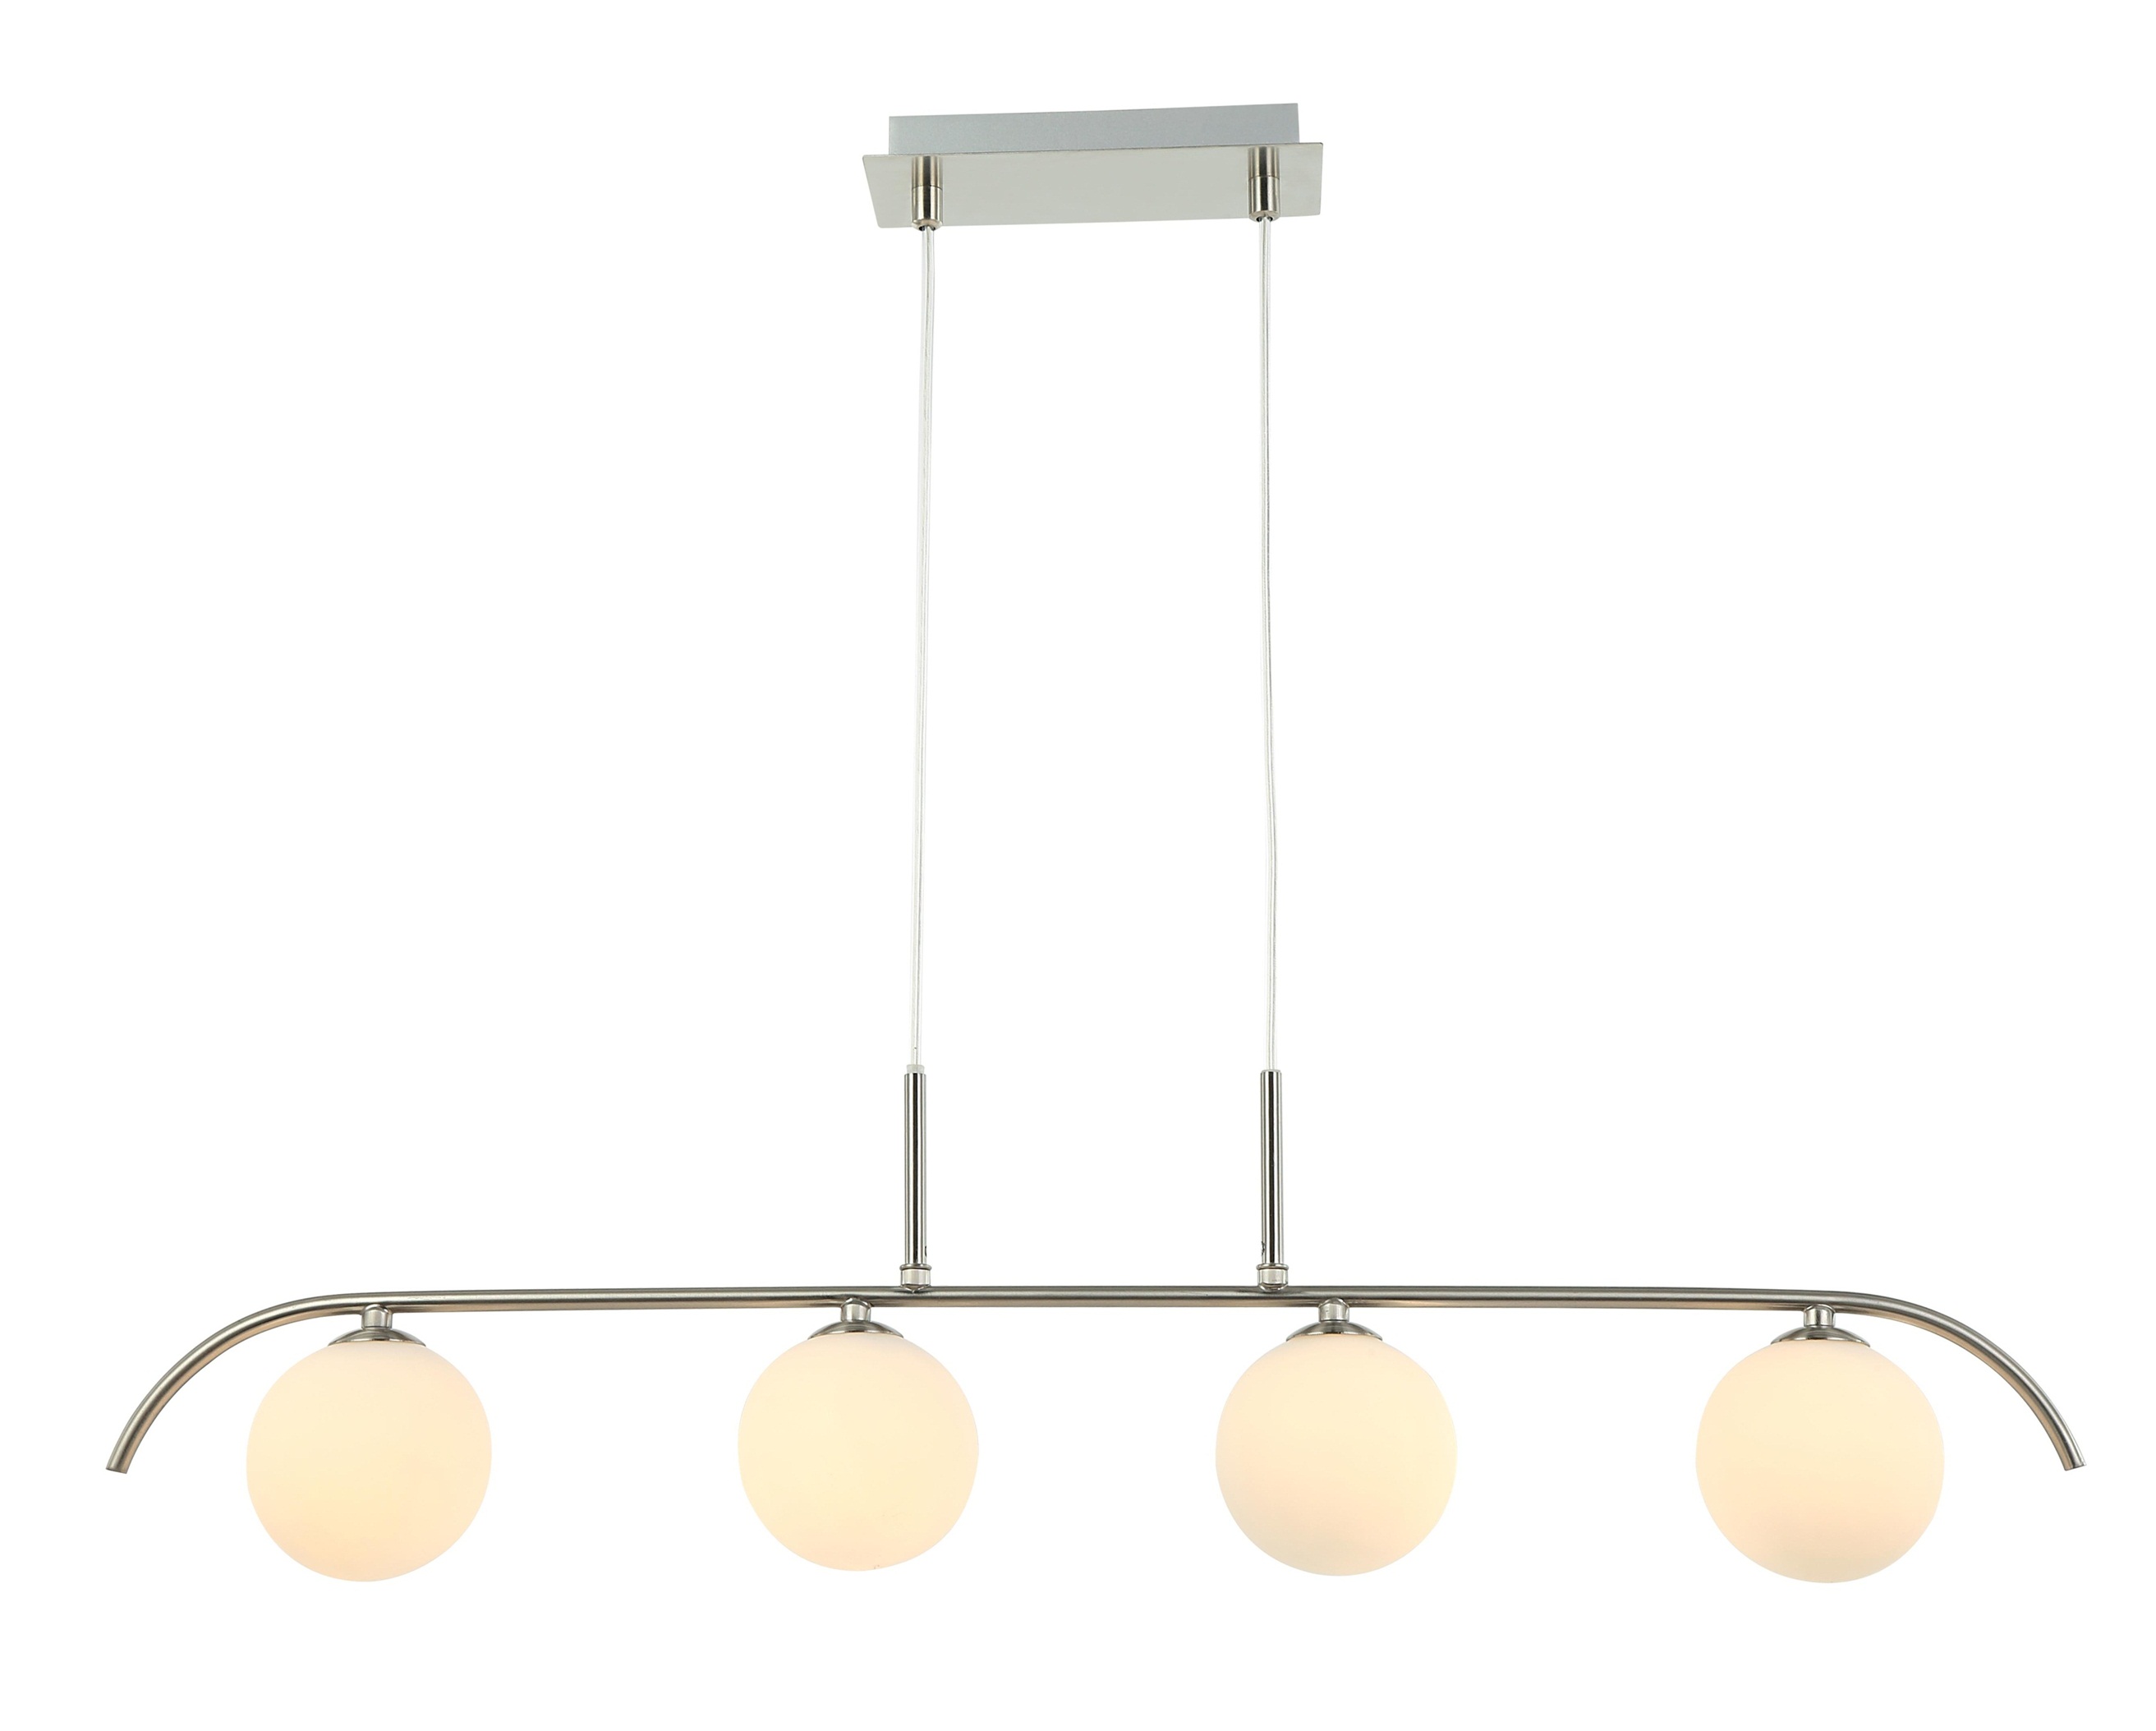 industry-leading hanging pendant lights kitchen for-sale for foyer-1